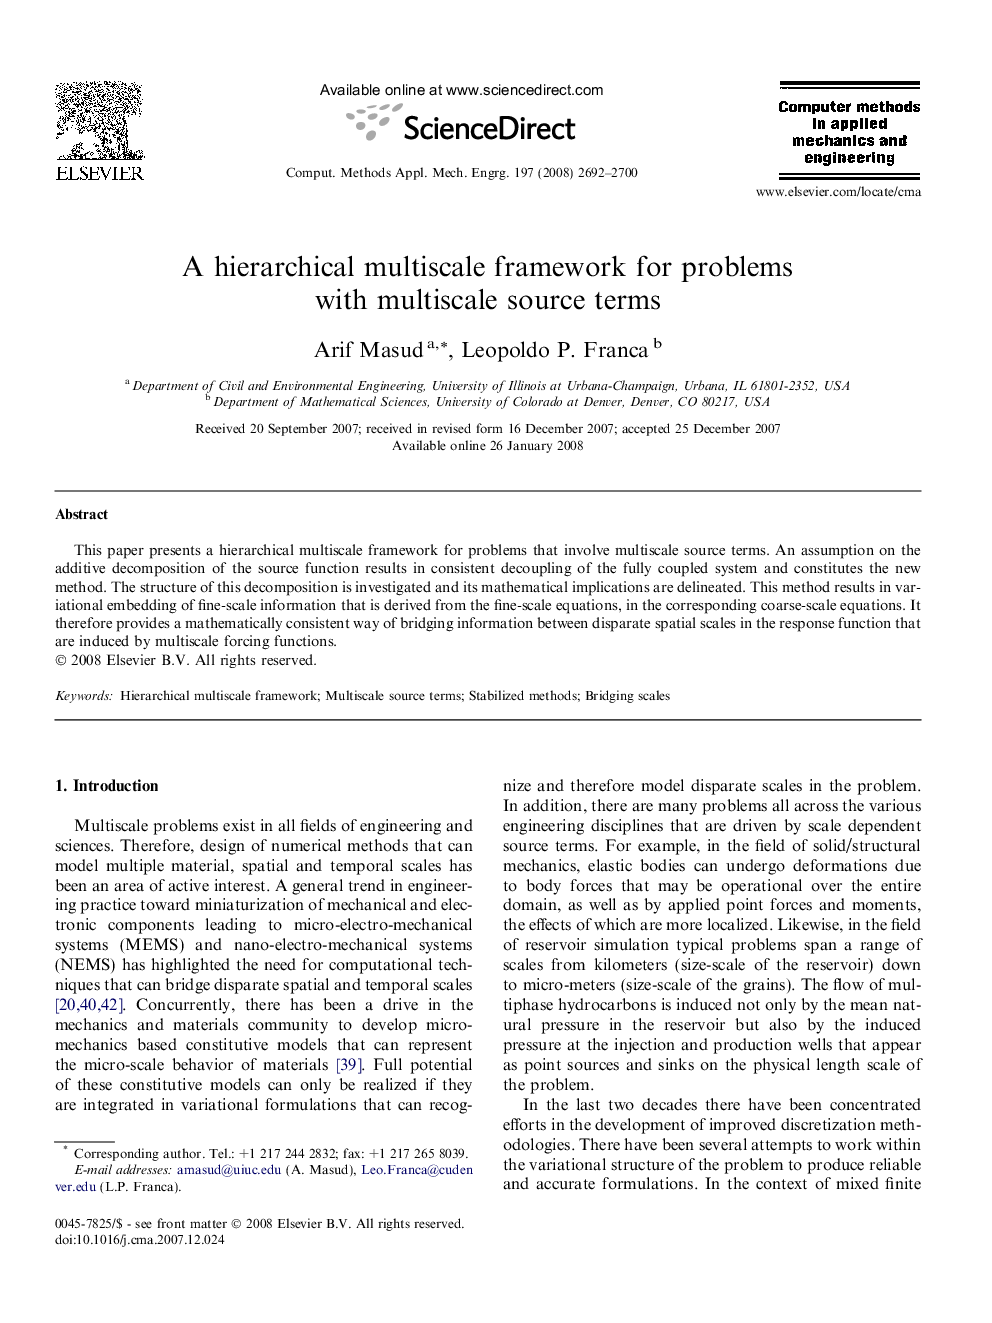 A hierarchical multiscale framework for problems with multiscale source terms